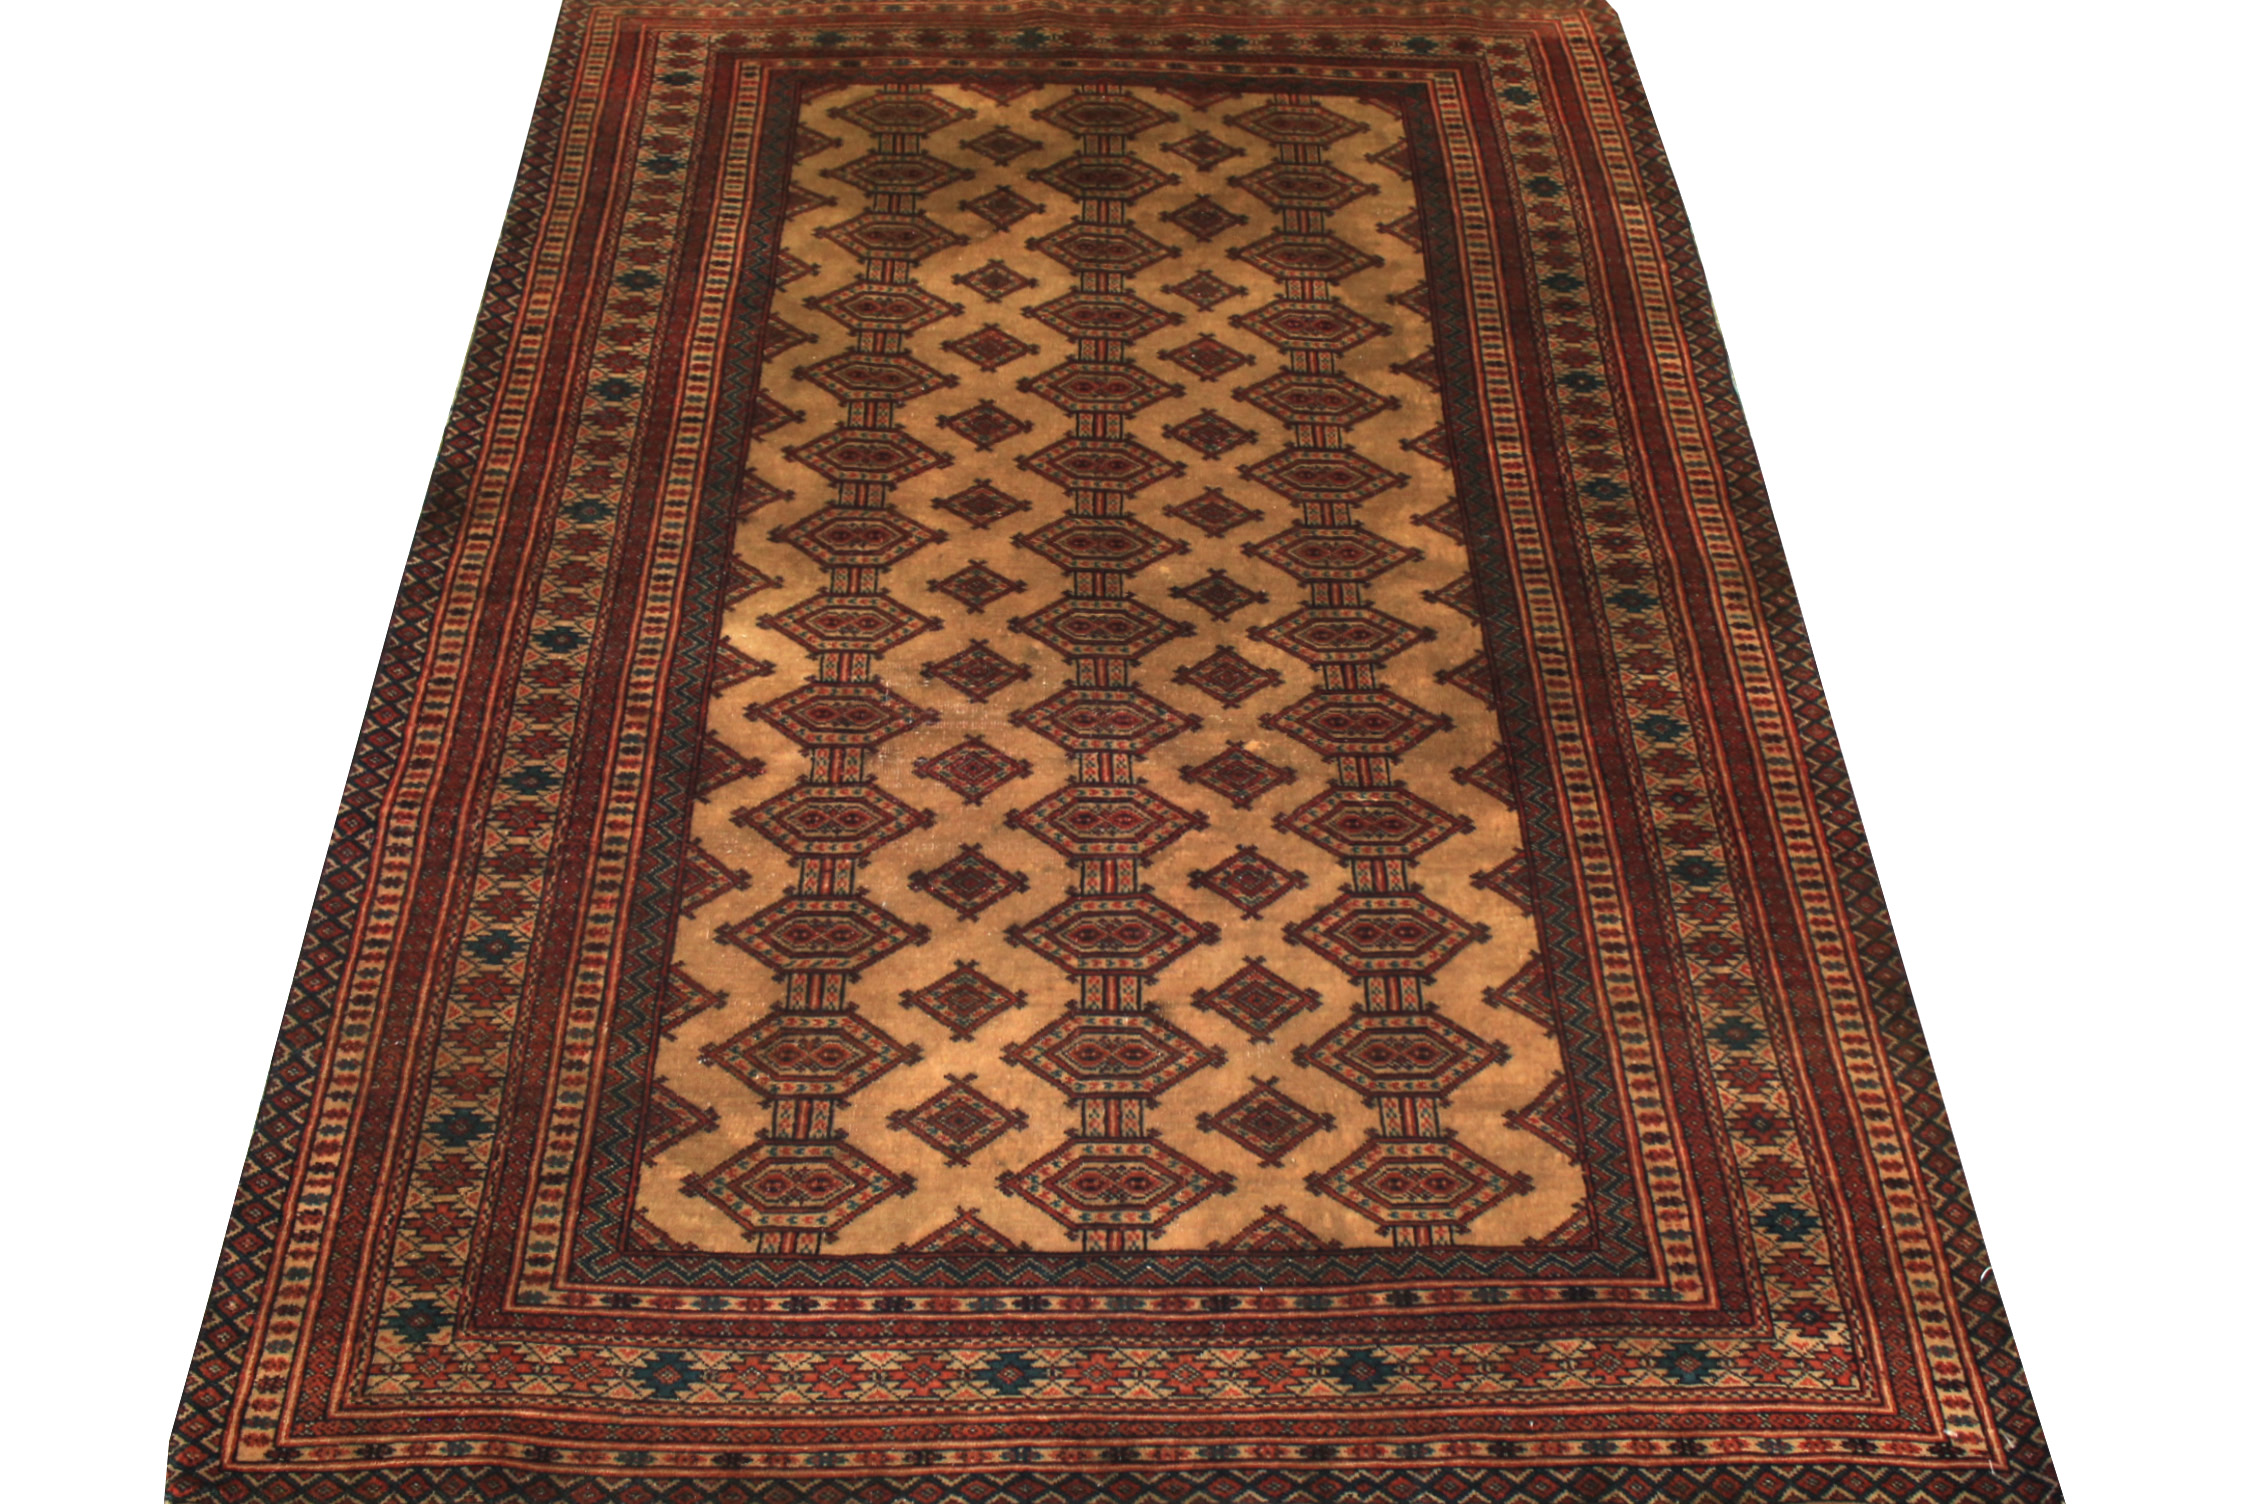 4x6 Geometric Hand Knotted Wool Area Rug - MR19449